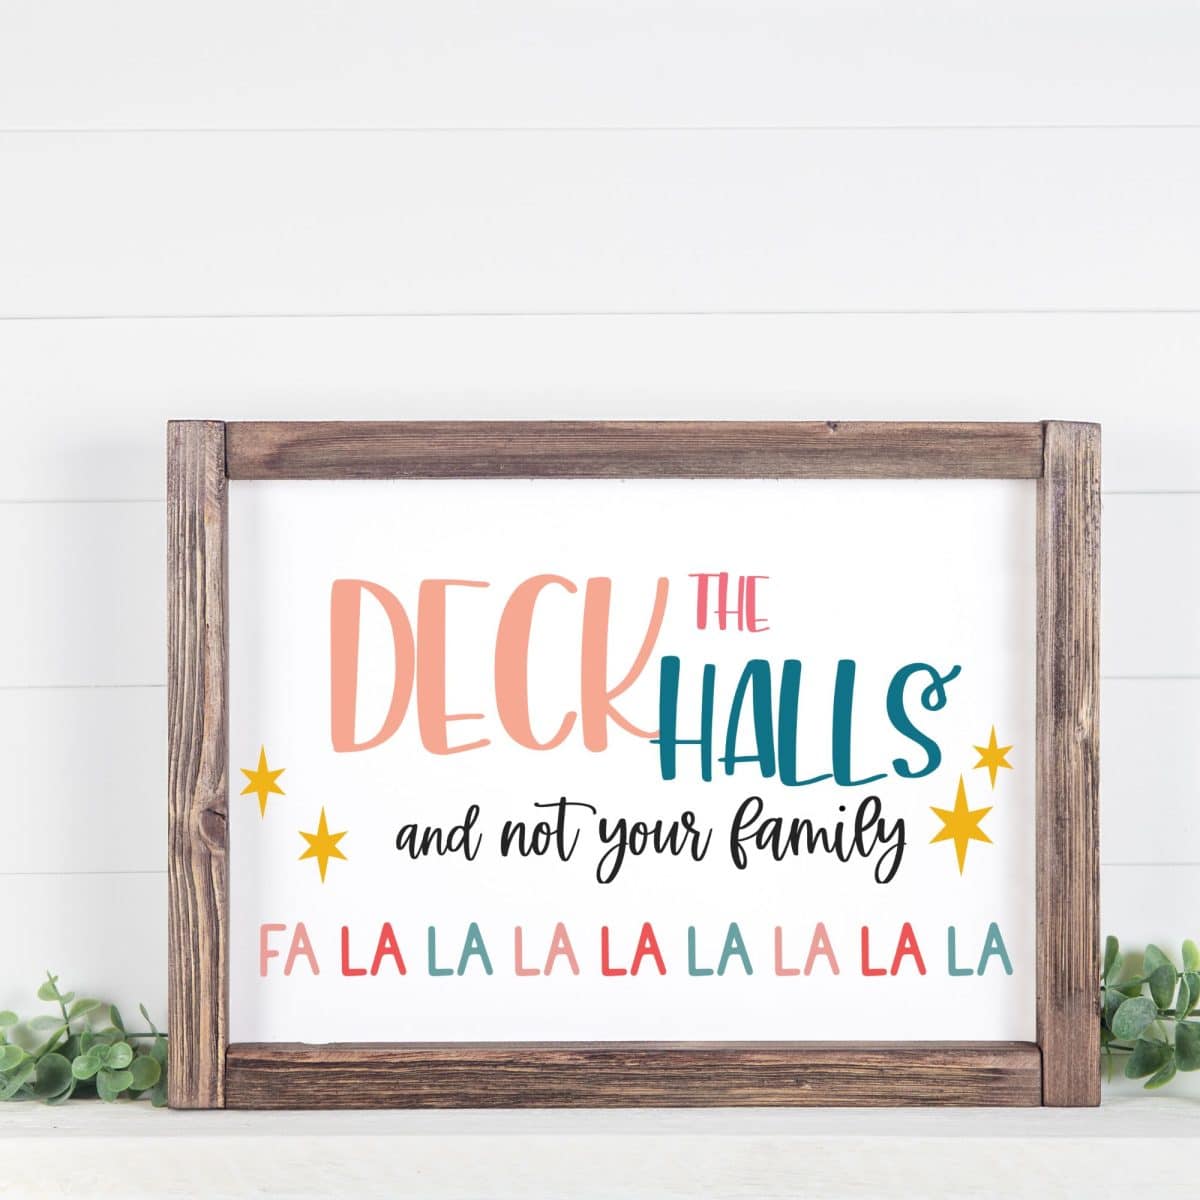 Funny Family Sign by Brooklyn Berry Designs